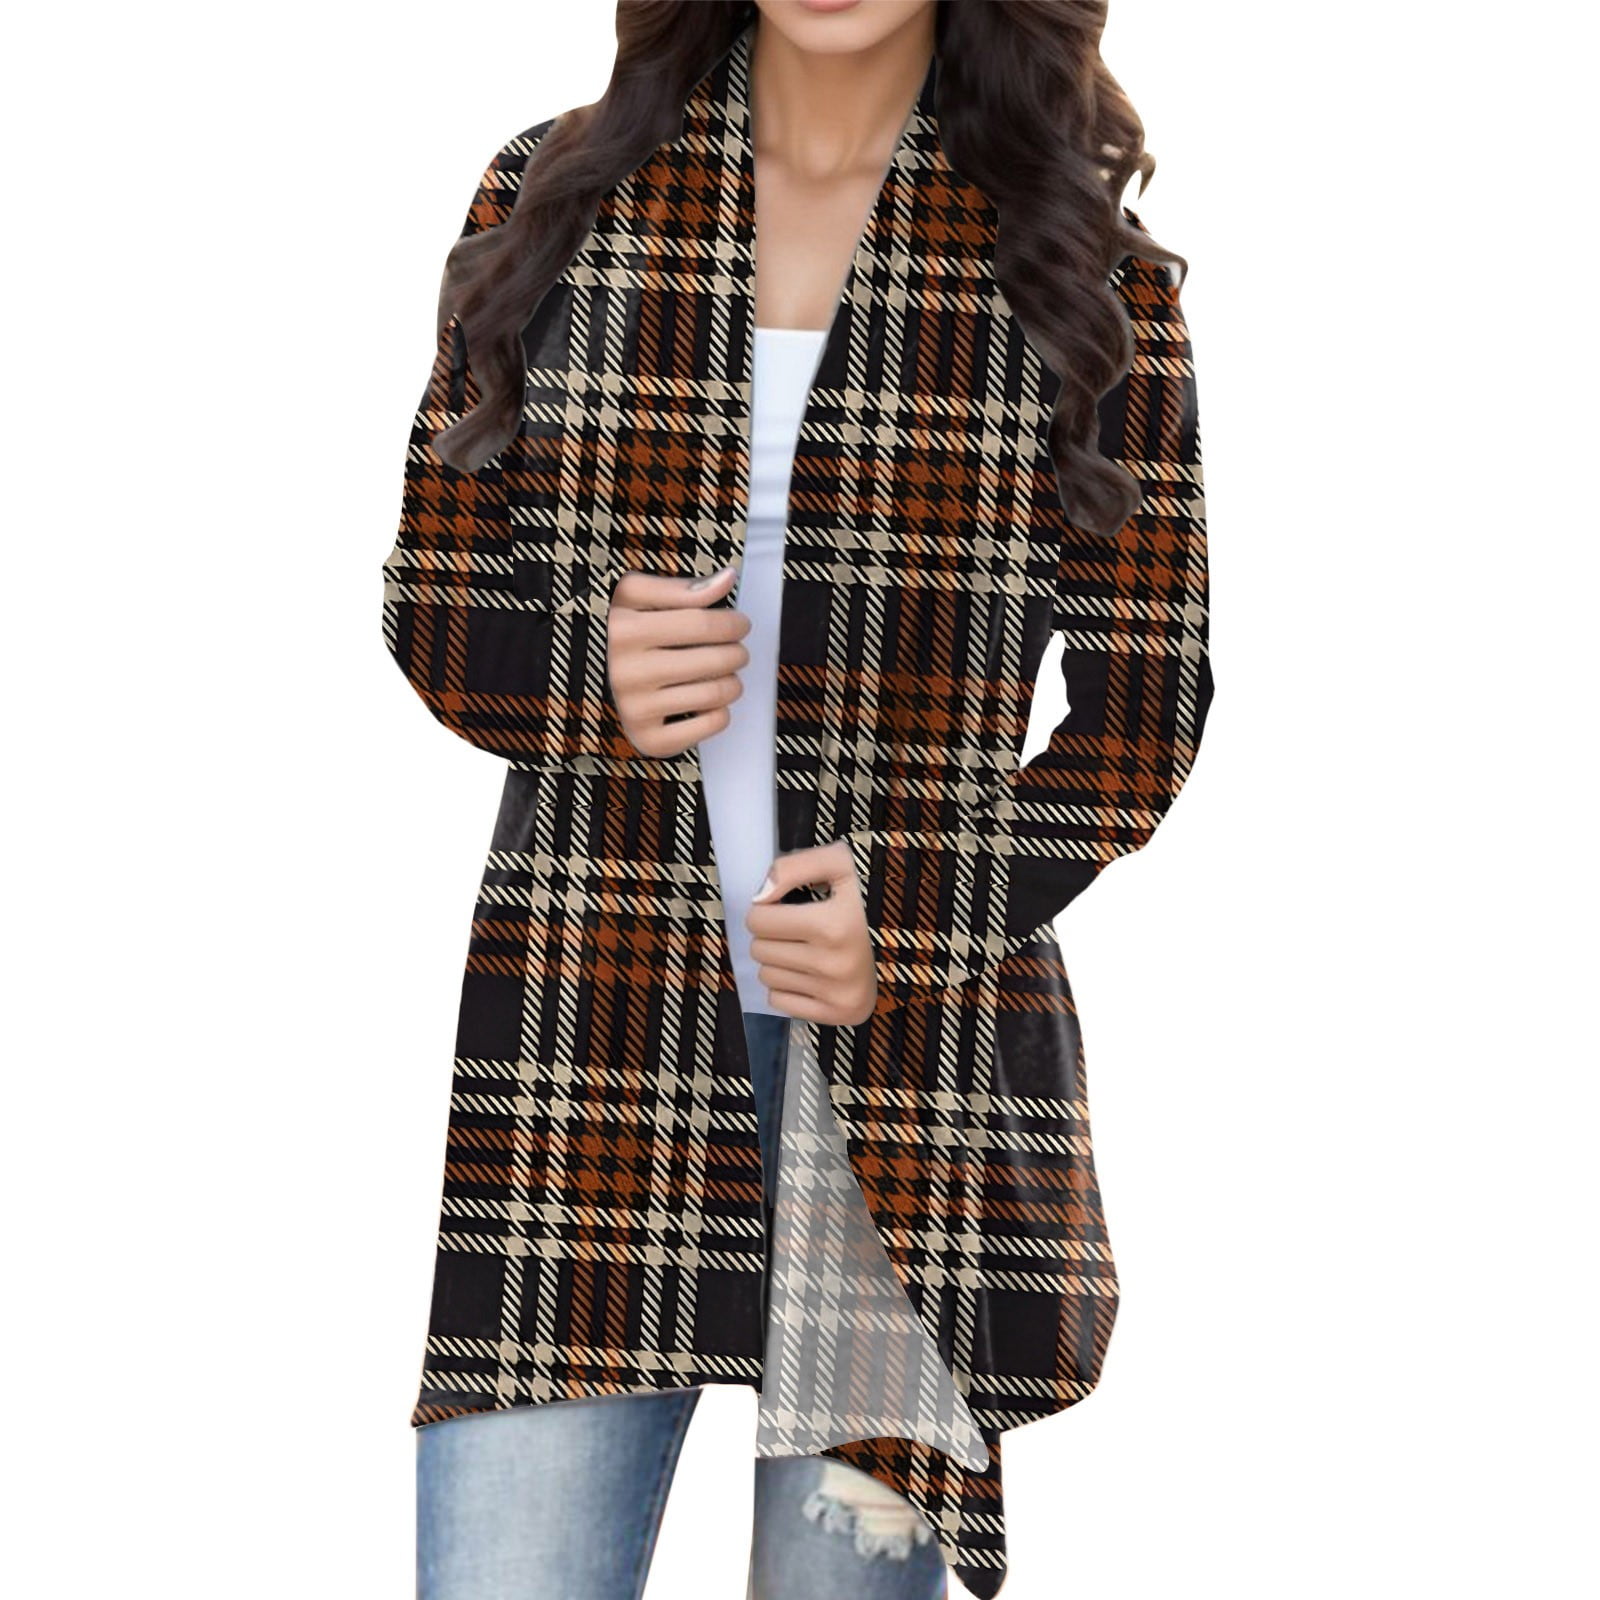 Hfolob Cardigans For Women Women's Long Sleeve Cardigan Front With ...